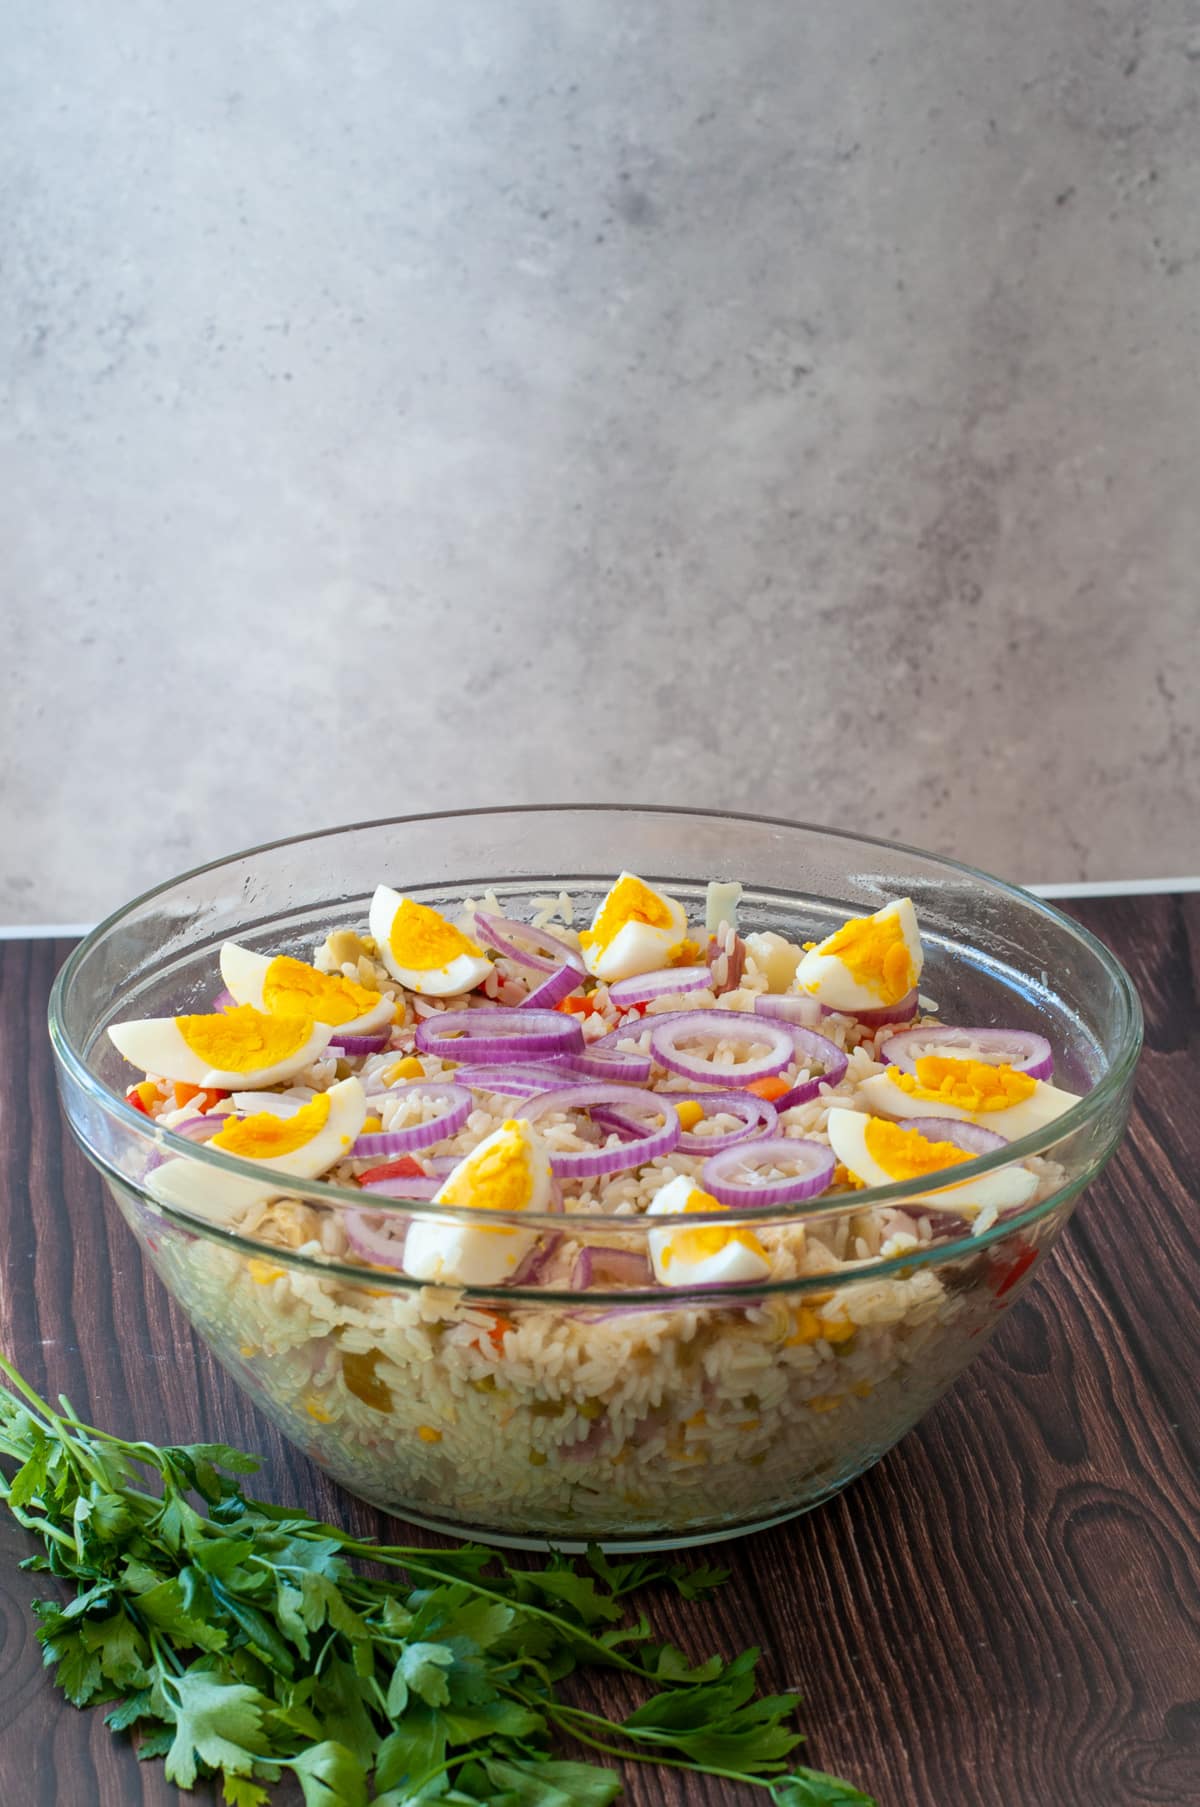 serving the rice salad in a bowl topped with boiled eggs for decoration